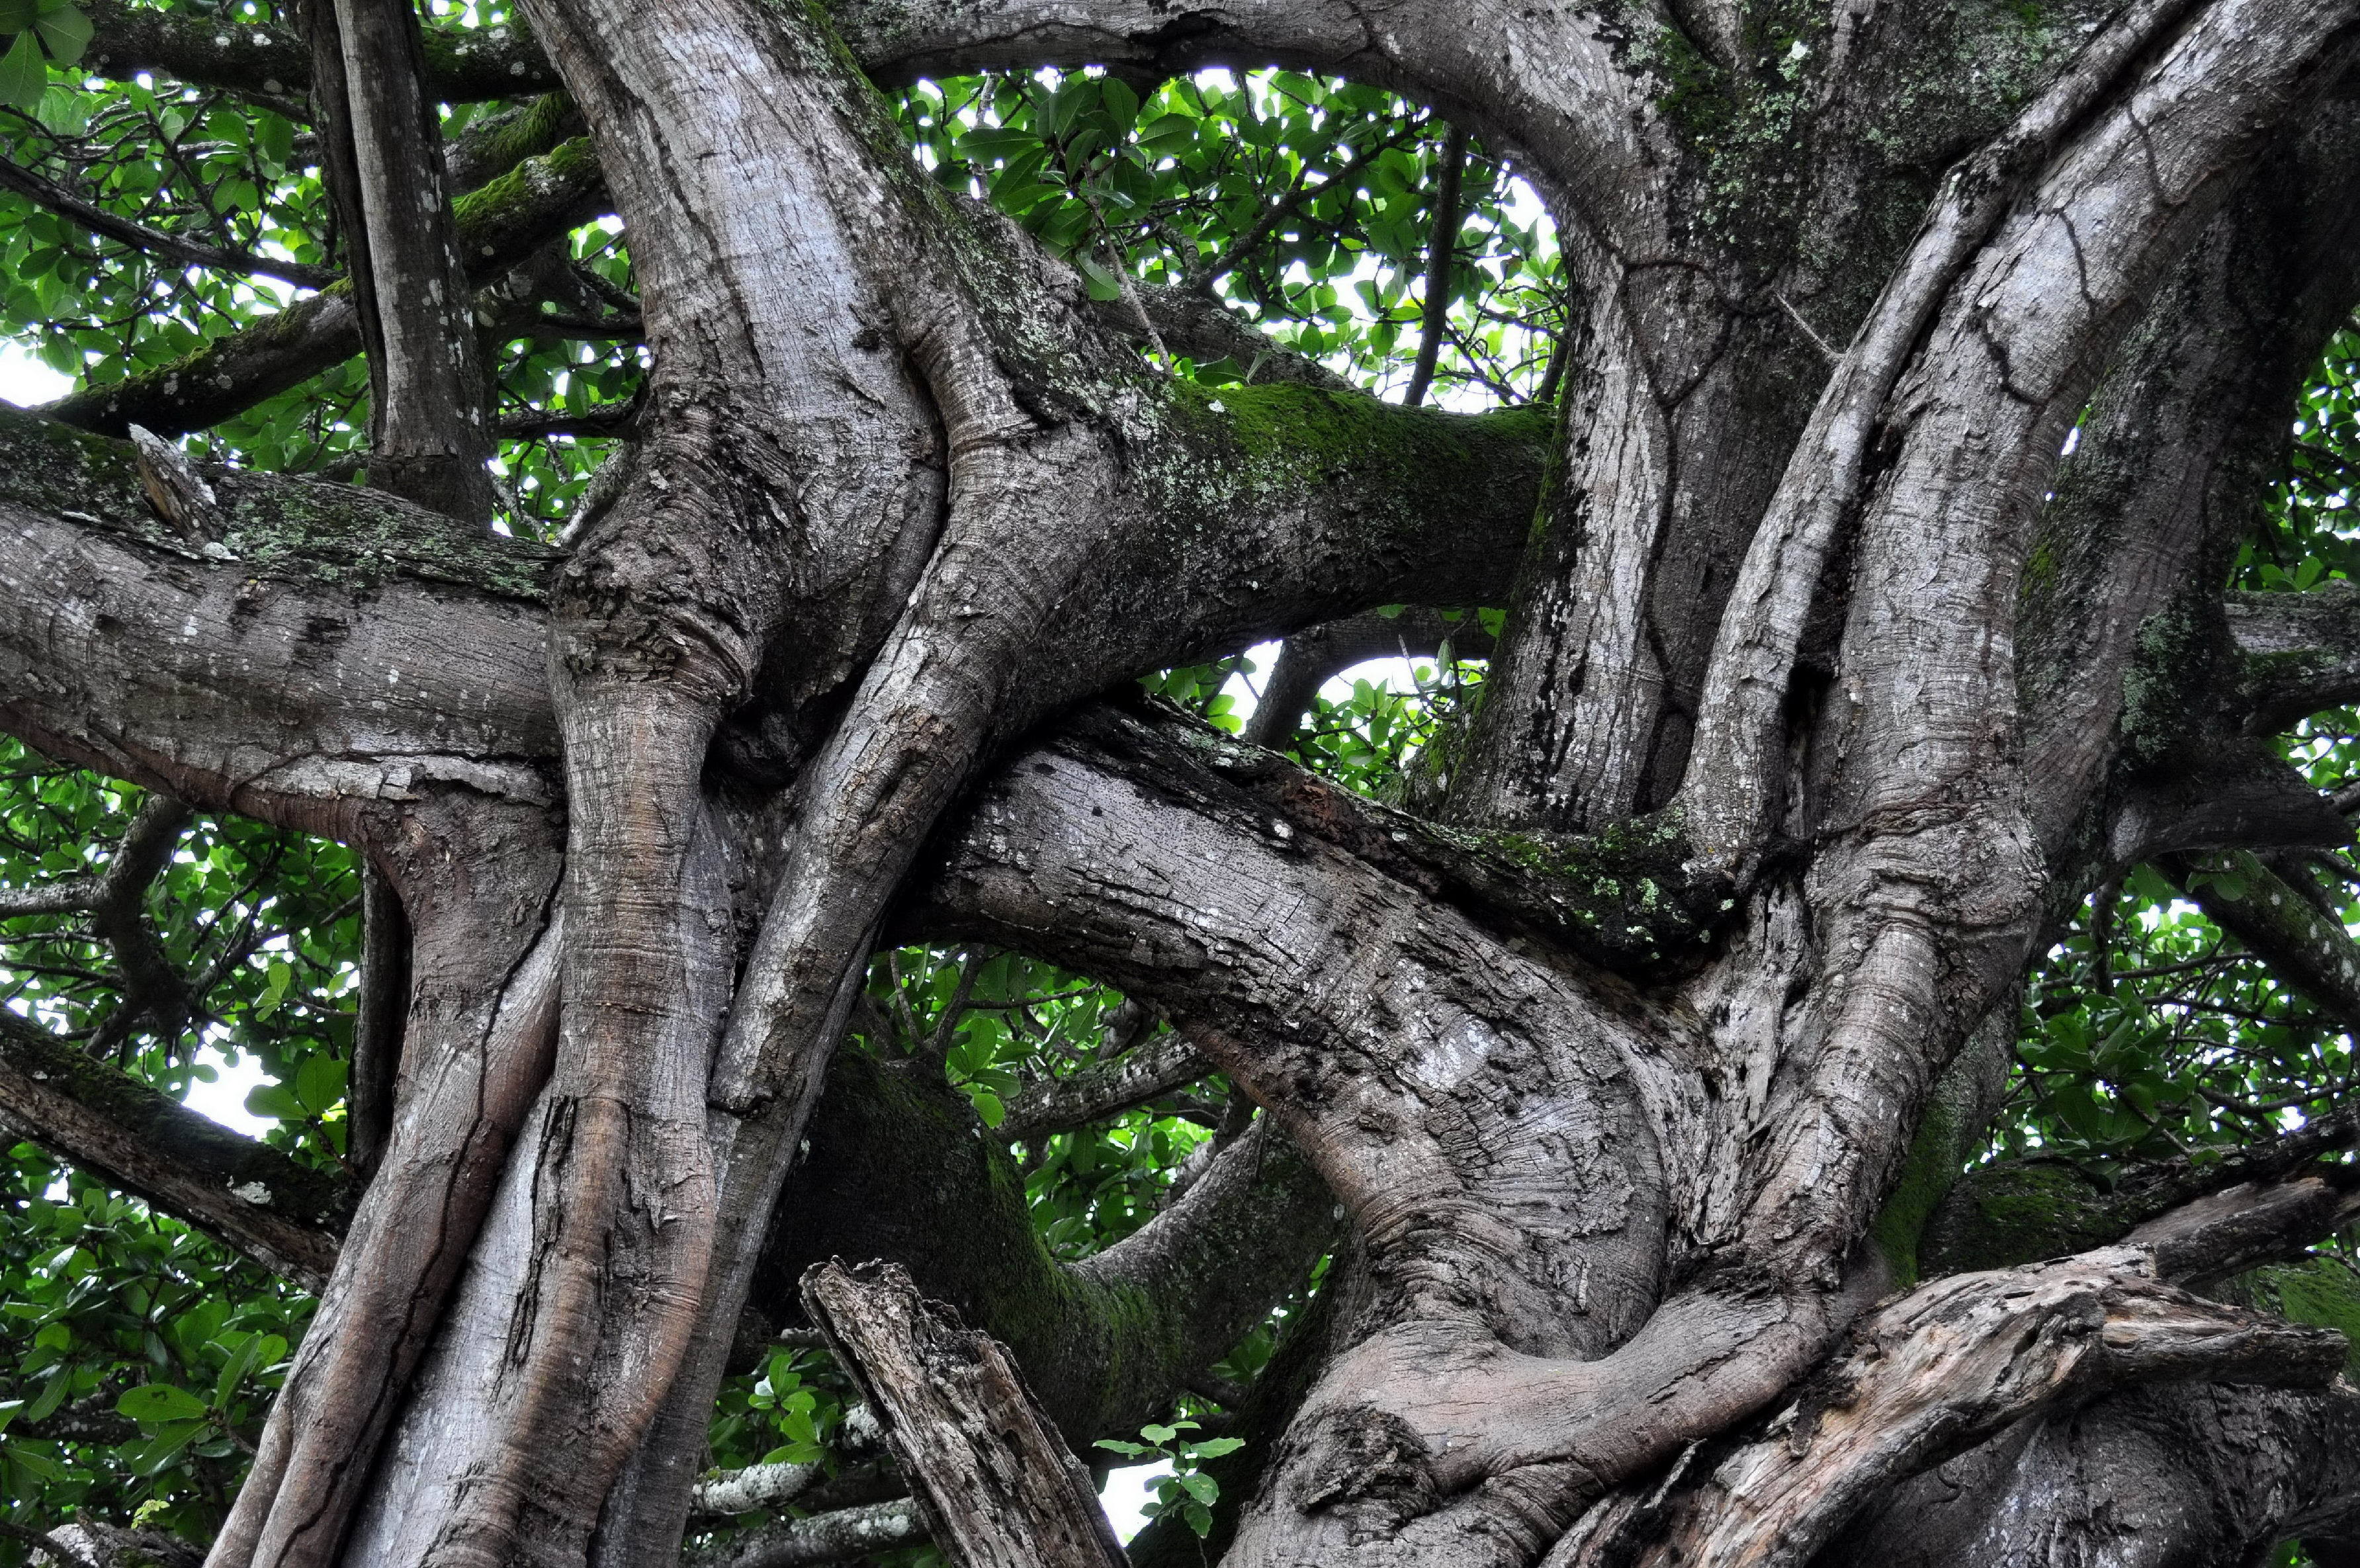 Intertwined branches of a large tree